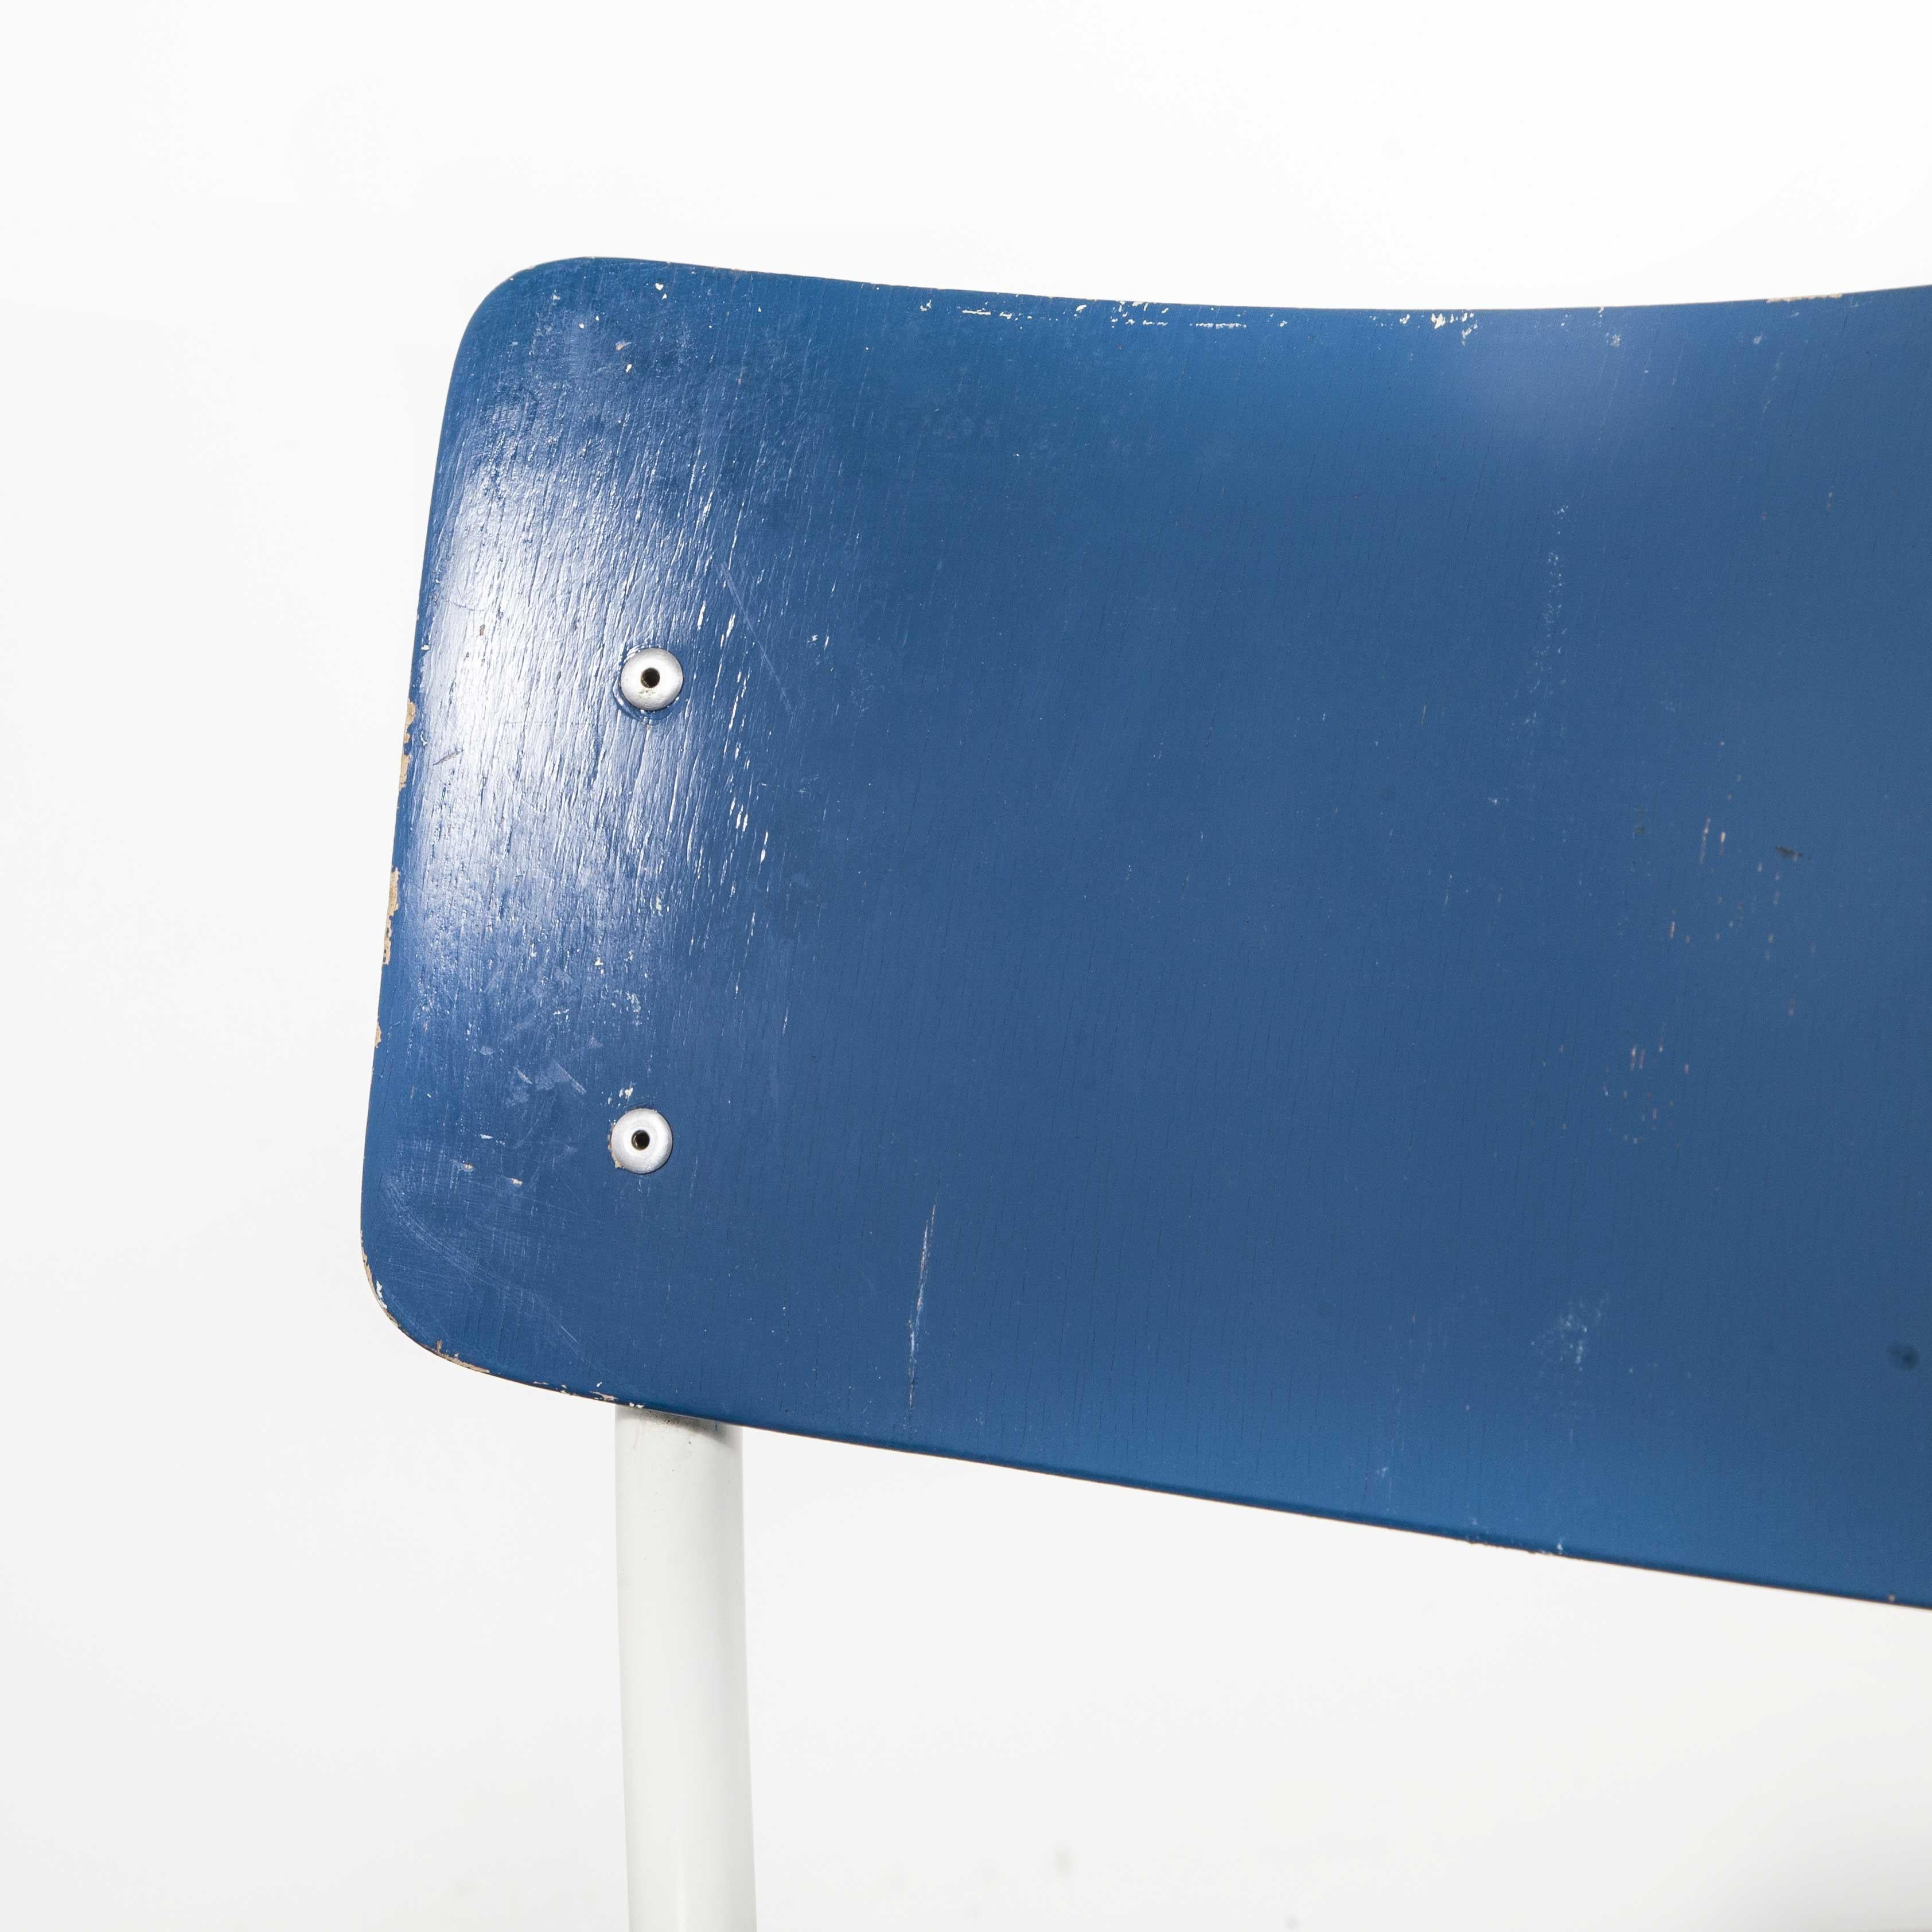 1970s Thonet stacking dining chairs for the German military - blue - set of six. Commissioned by the Bundeswehr and made by Thonet these chairs were made for the German Military. It's not often we see coloured chairs so we snapped them up and we